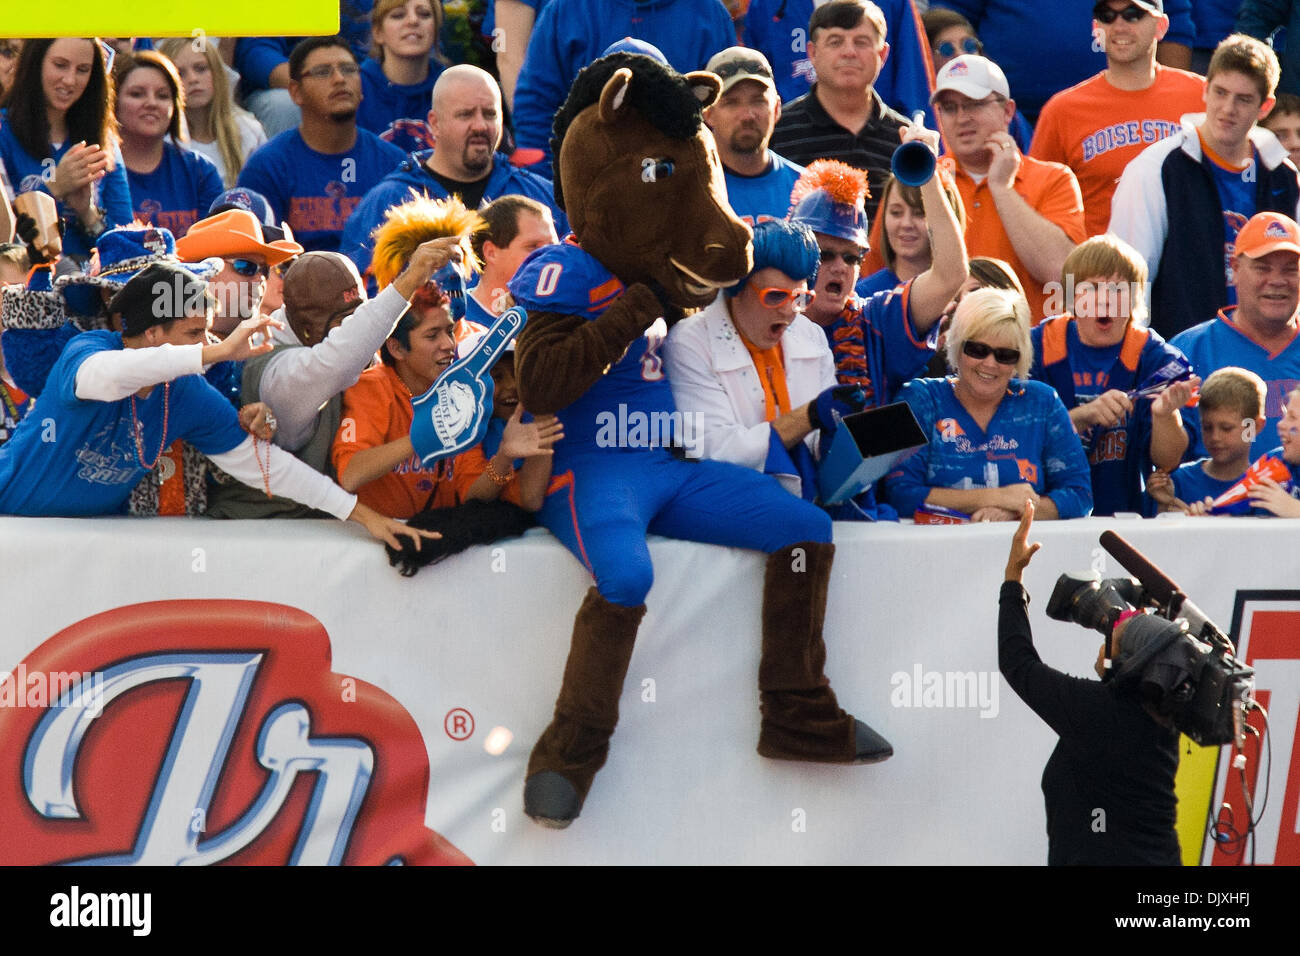 Nov. 6, 2010 - Boise, Idaho, United States of America - Boise State mascot Buster Bronco poses for the cameras with the fans in the South end zone during second half action as #2 Boise State defeated Hawaii 42-7  in Bronco Stadium. (Credit Image: © Stanley Brewster/Southcreek Global/ZUMApress.com) Stock Photo